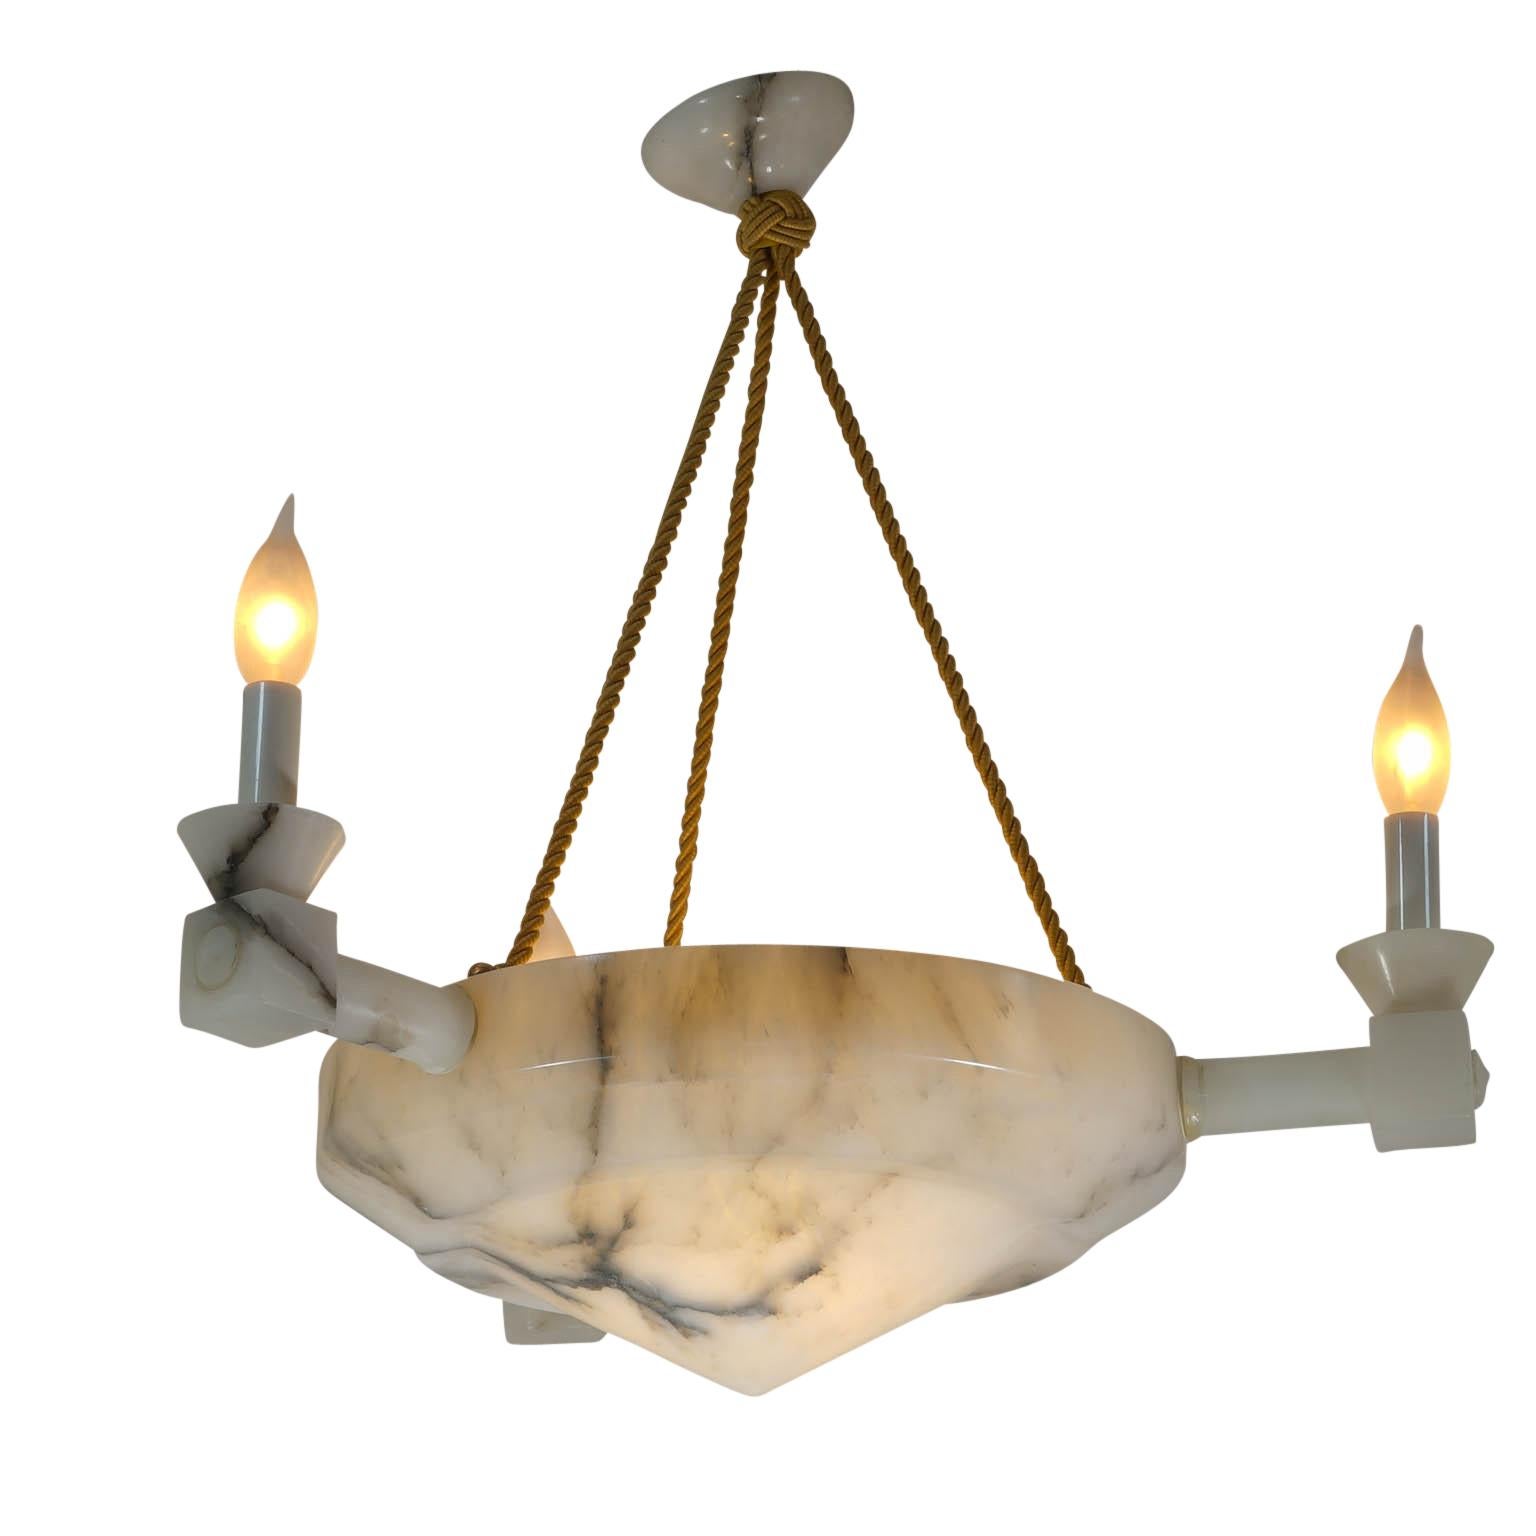 A central shade with an interior bulb is softly illuminated as the focus of the design, while three arms stretch lighting into the room. Rewired and impeccably polished.